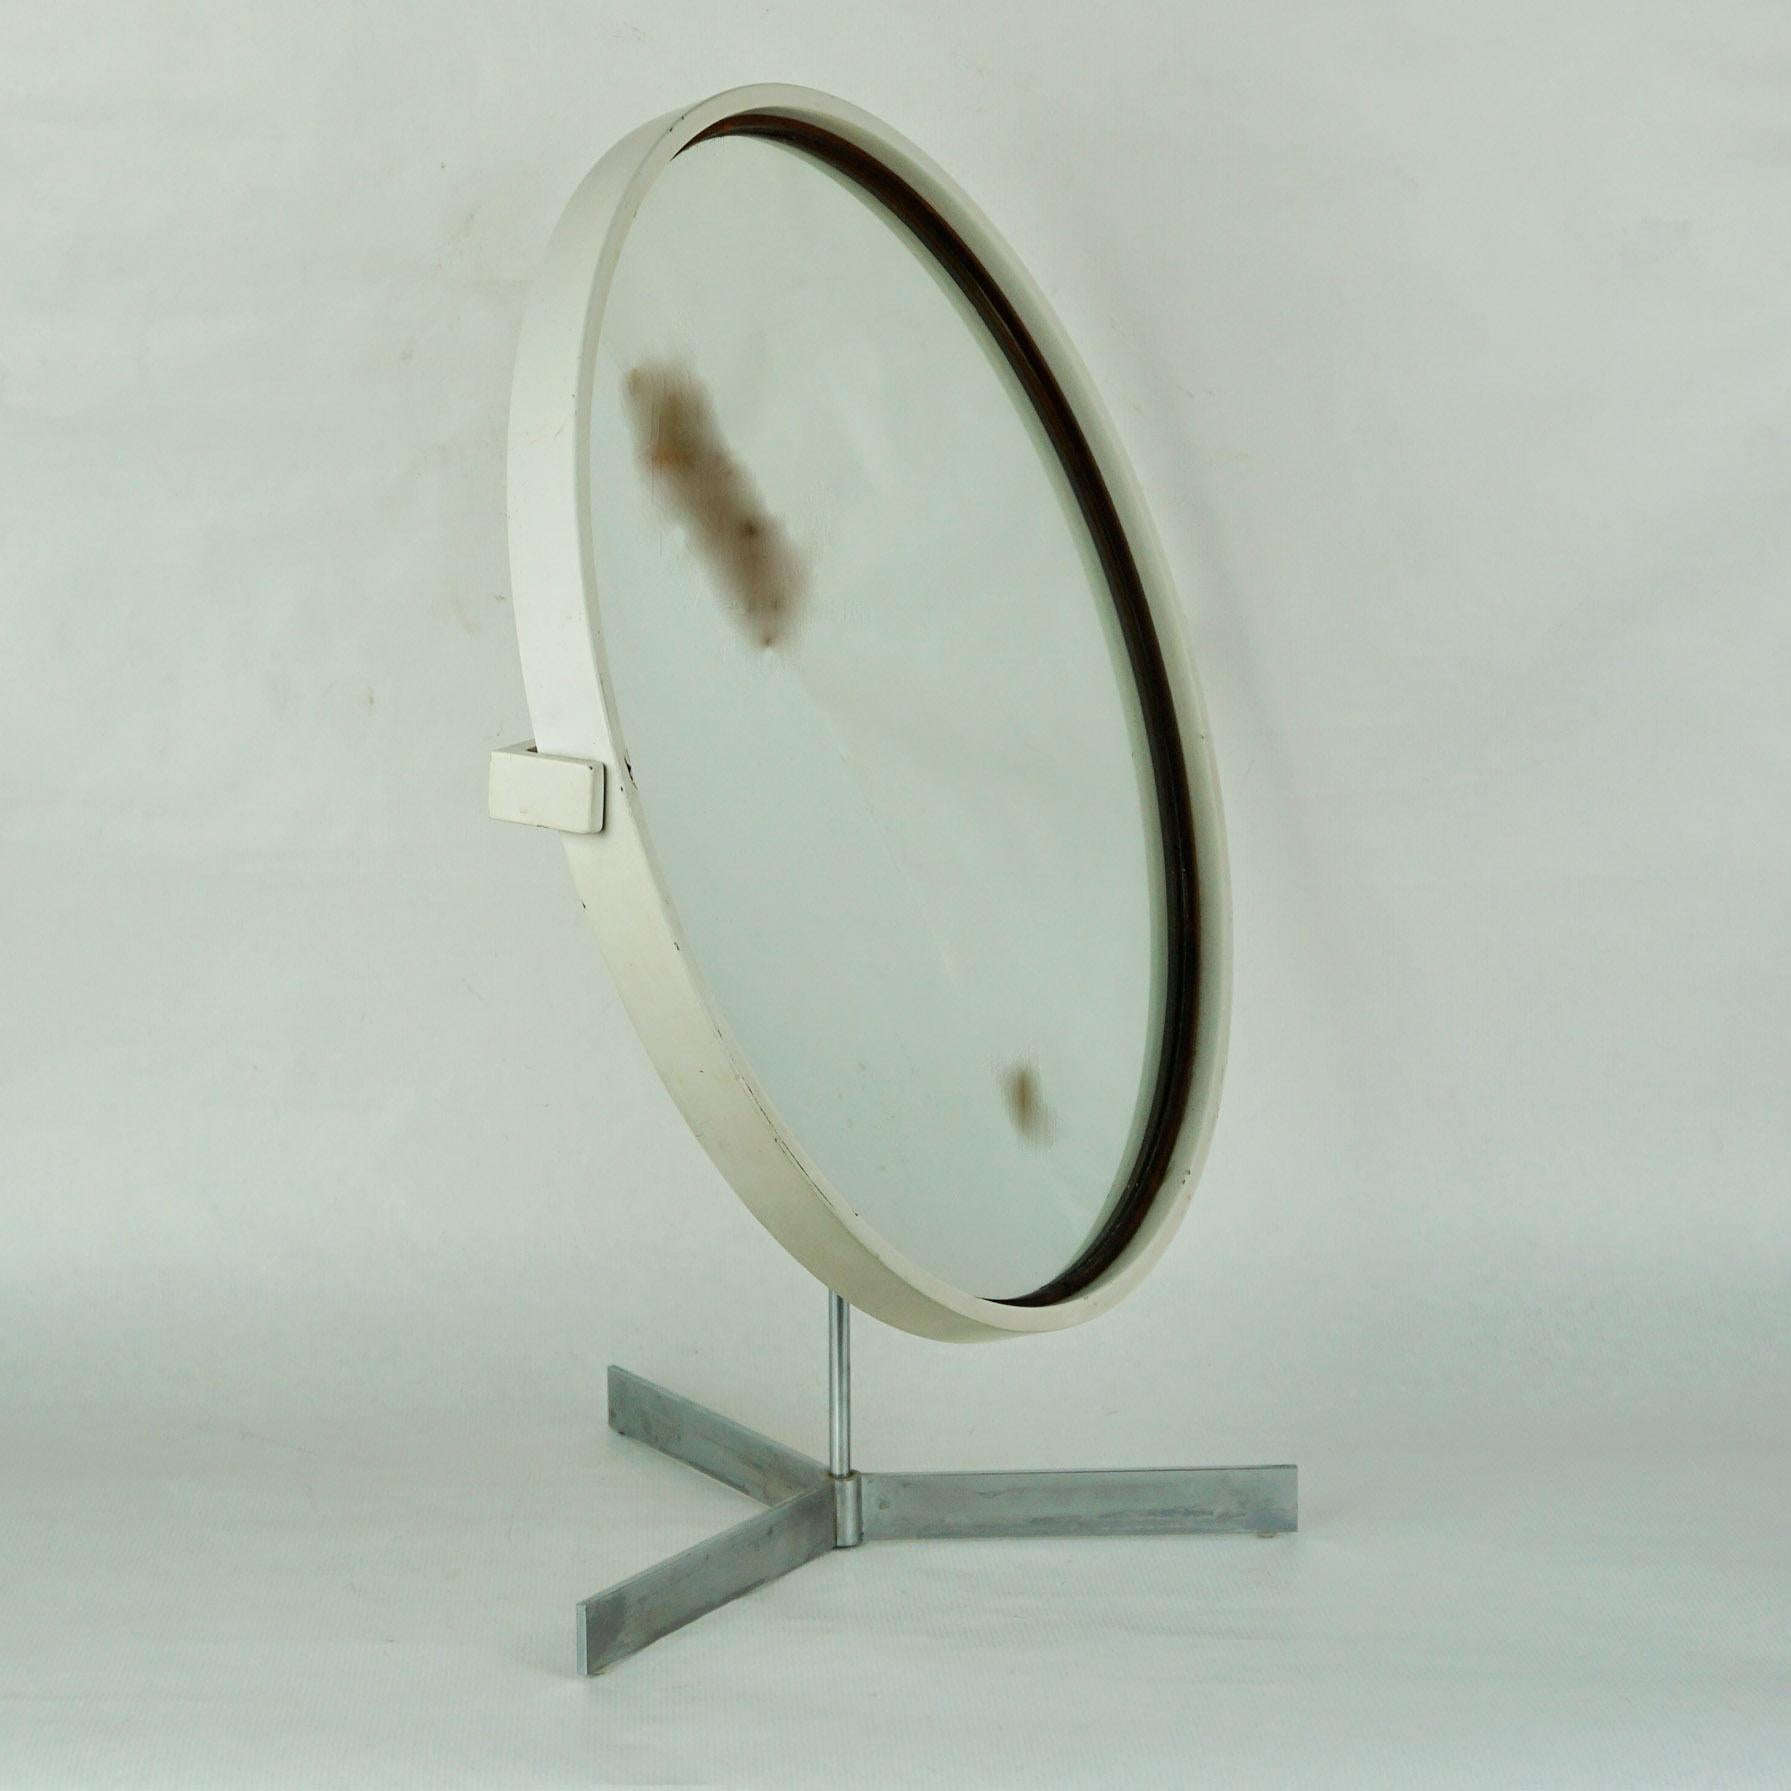 Mid-20th Century White Scandinavian Modern Table Mirror by U. and O. Kristiansson for Luxus For Sale